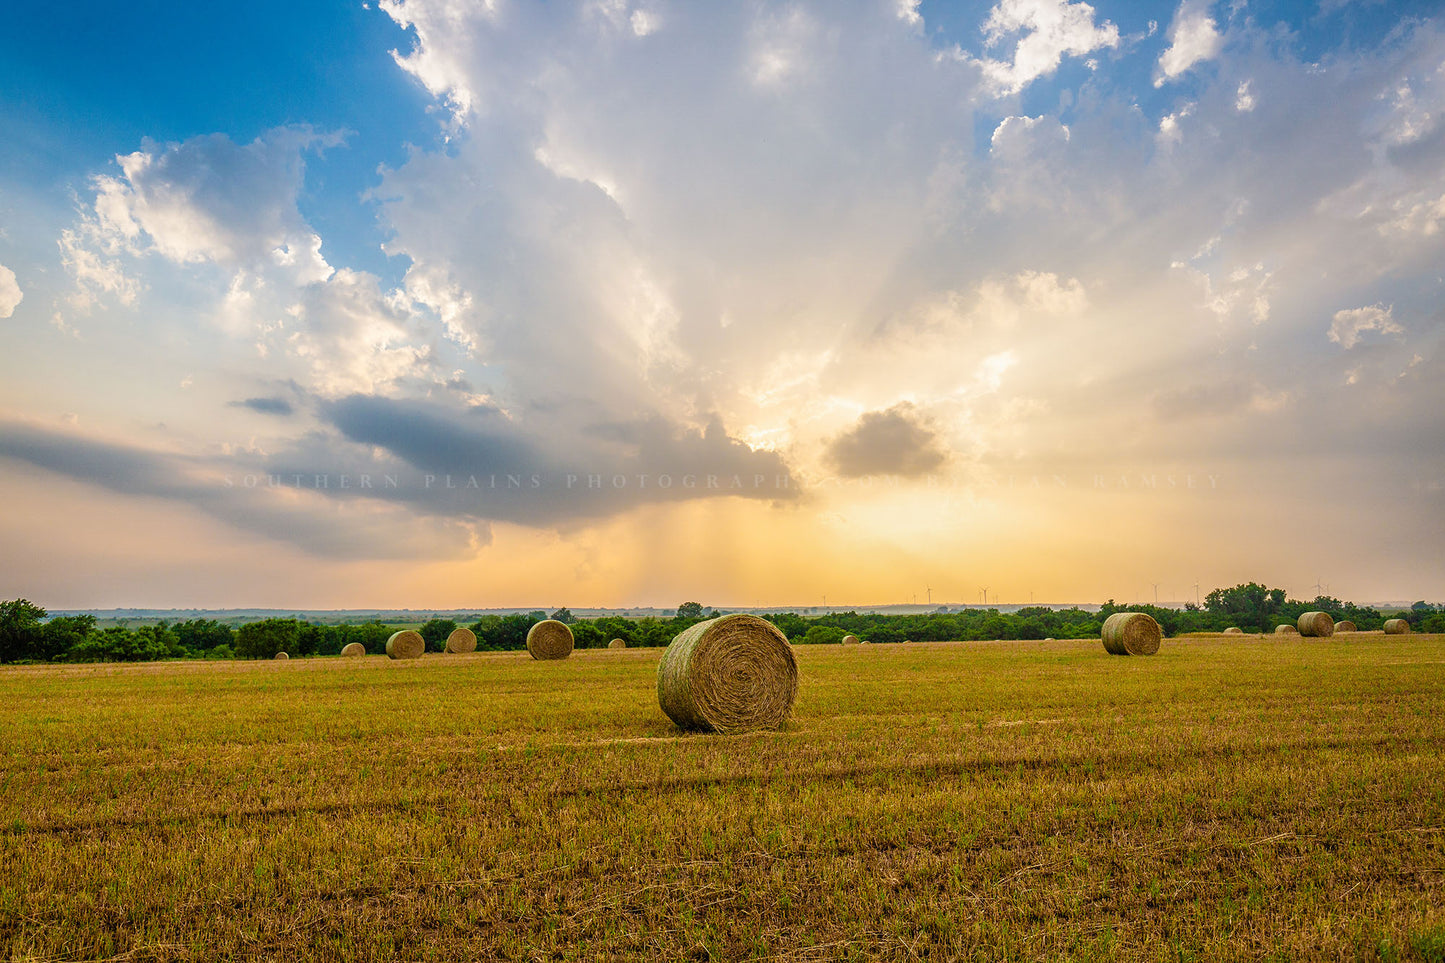 Country photography print of round hay bales under a stormy sky filled with golden sunlight on a spring day in Oklahoma by Sean Ramsey of Southern Plains Photography.